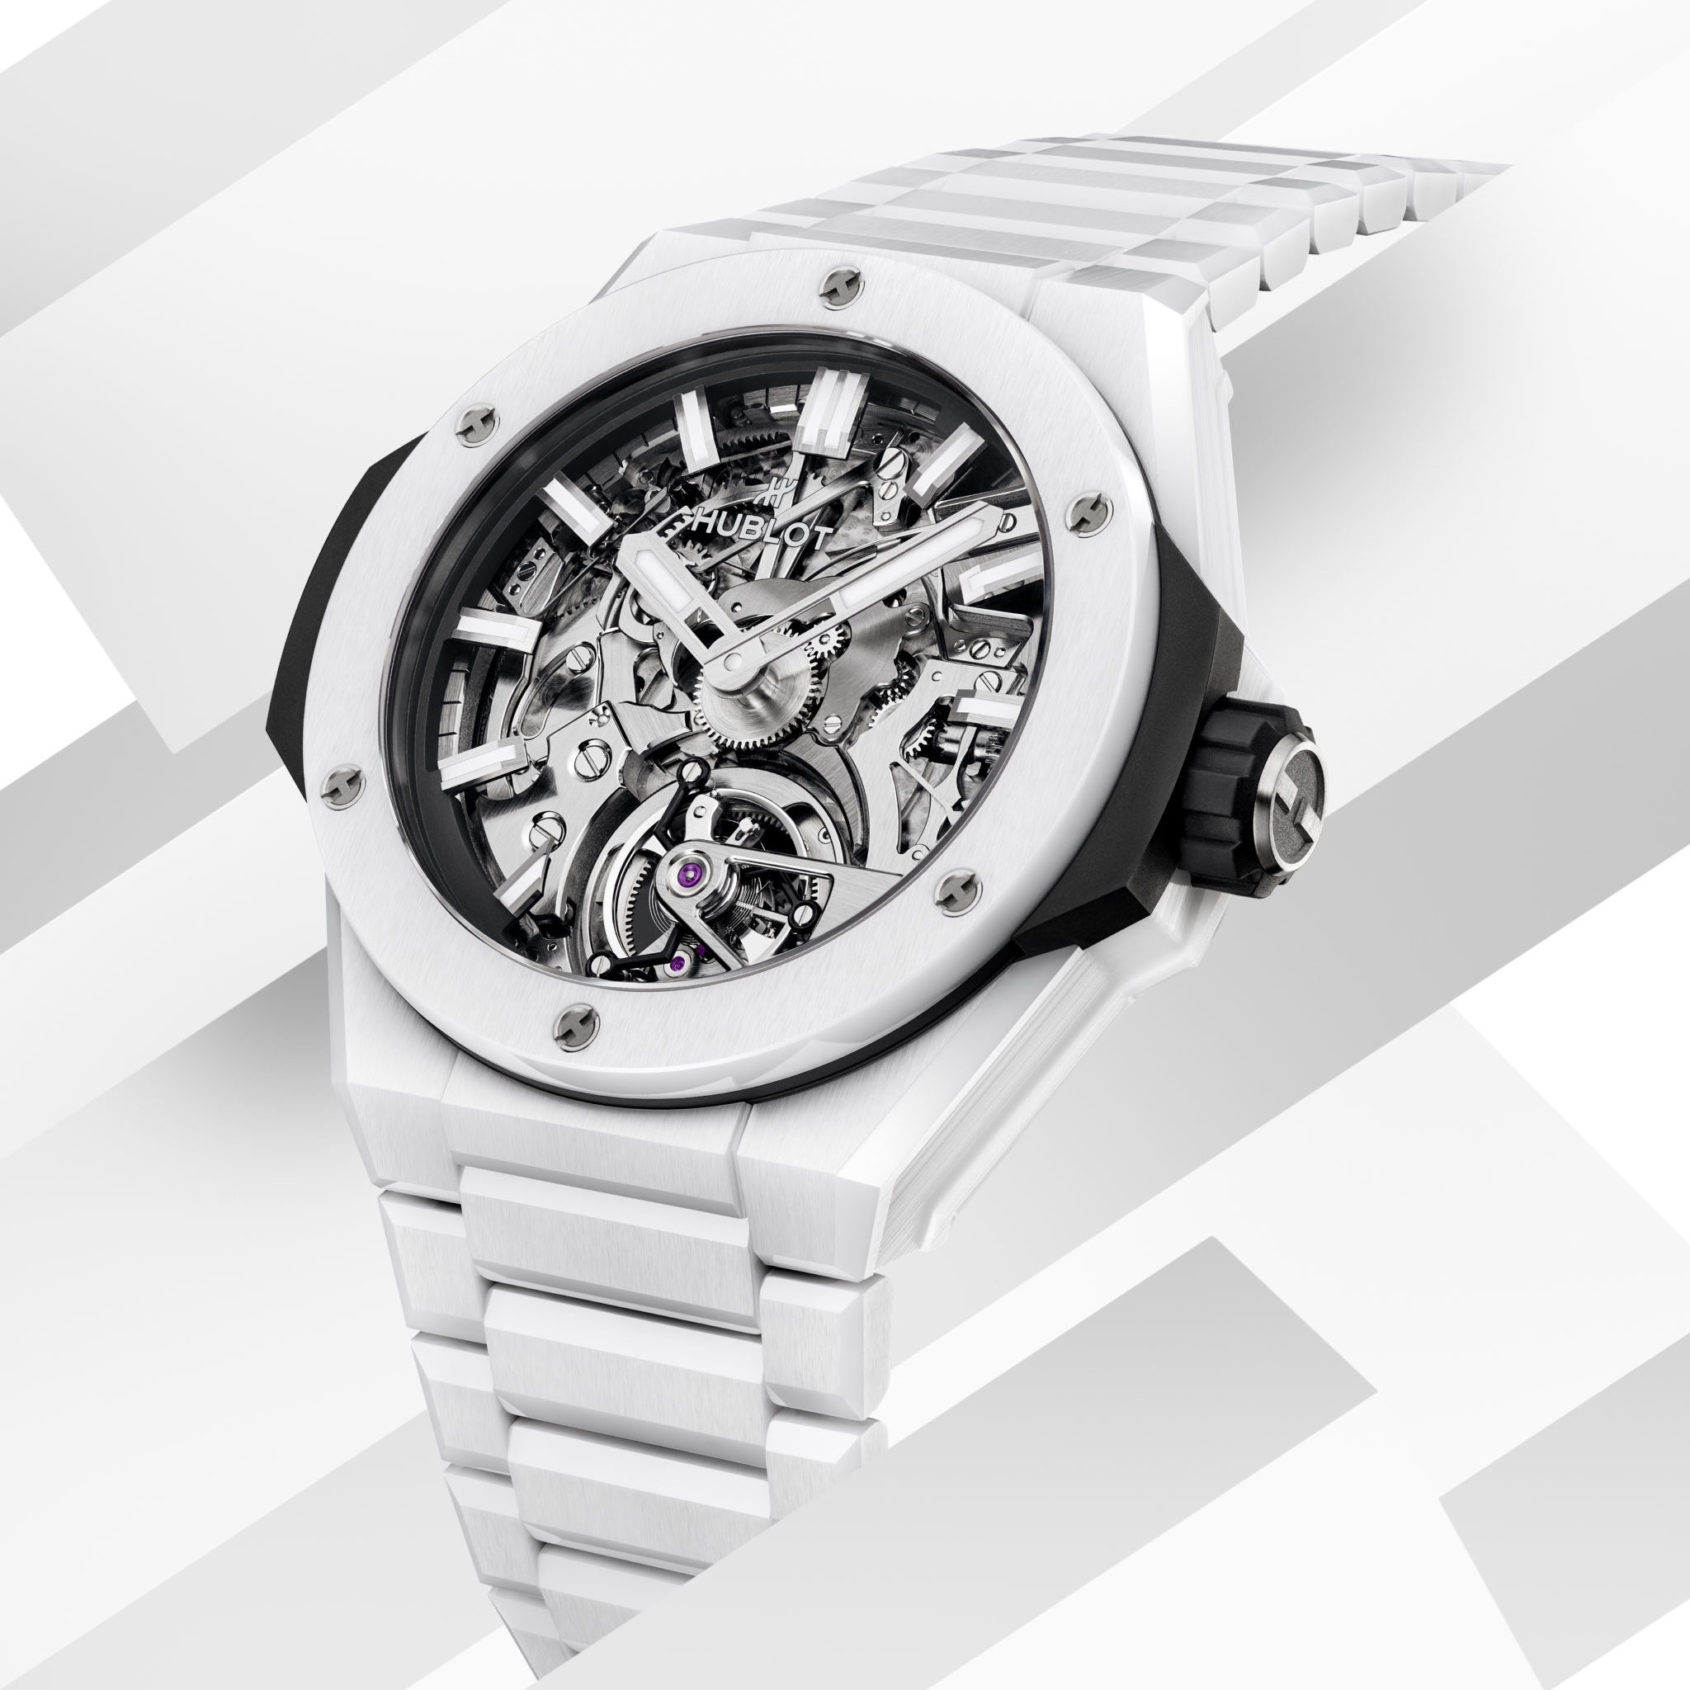 INTRODUCING: Hublot debuts the first-ever 100% ceramic-cased minute repeater